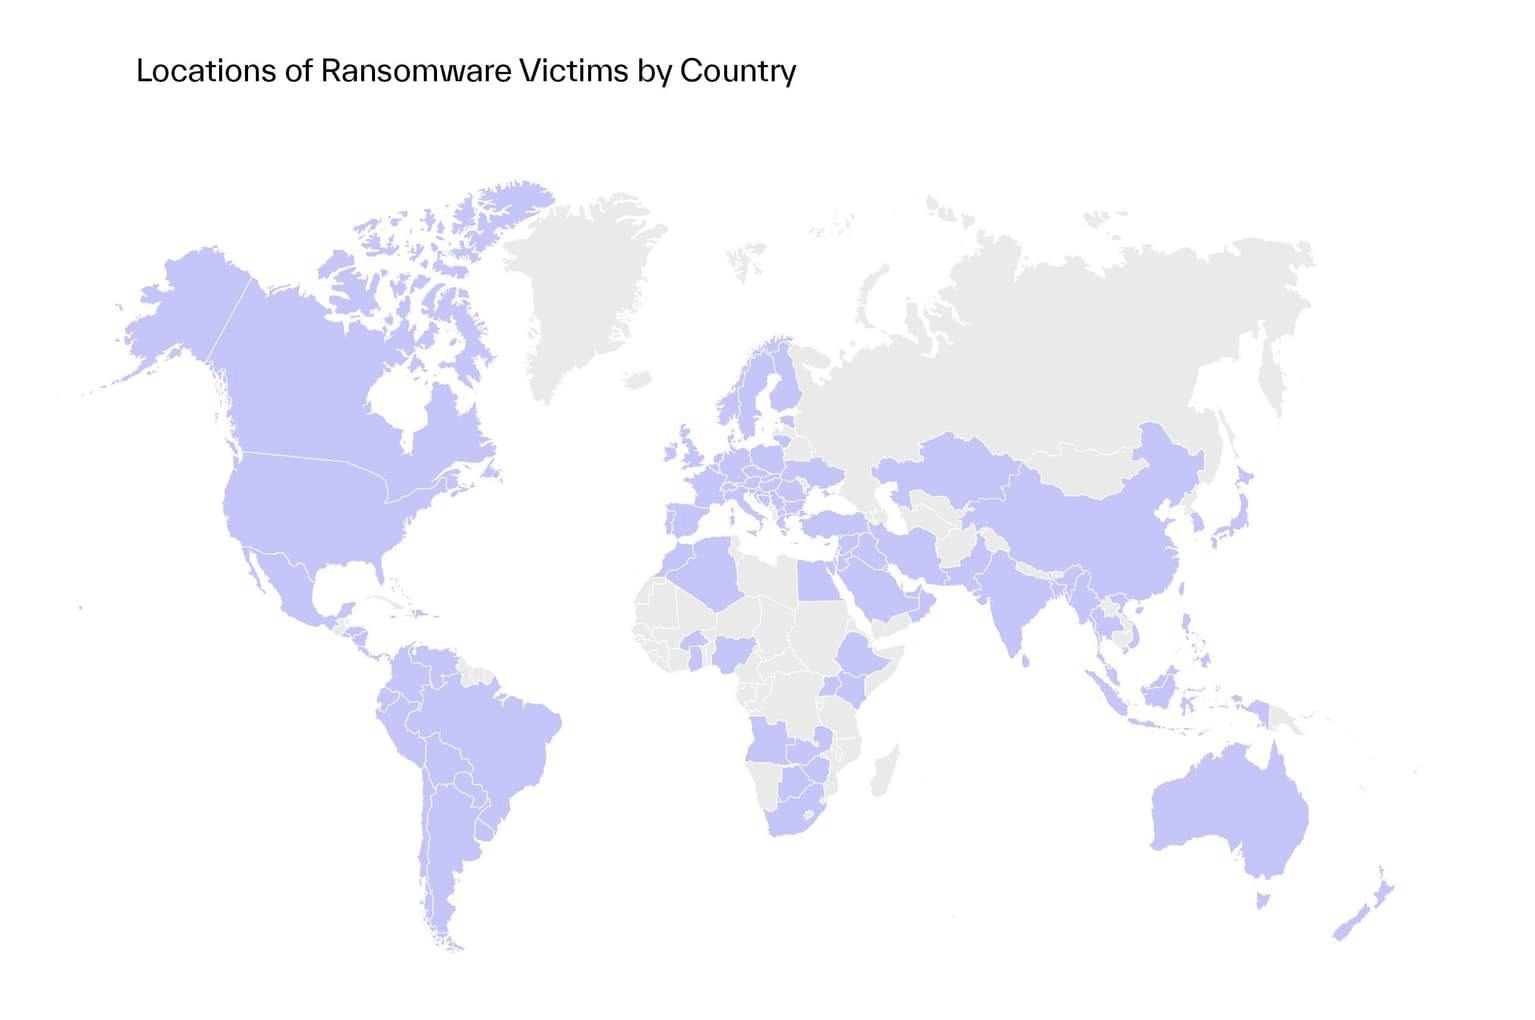 Ransomware victims by country location